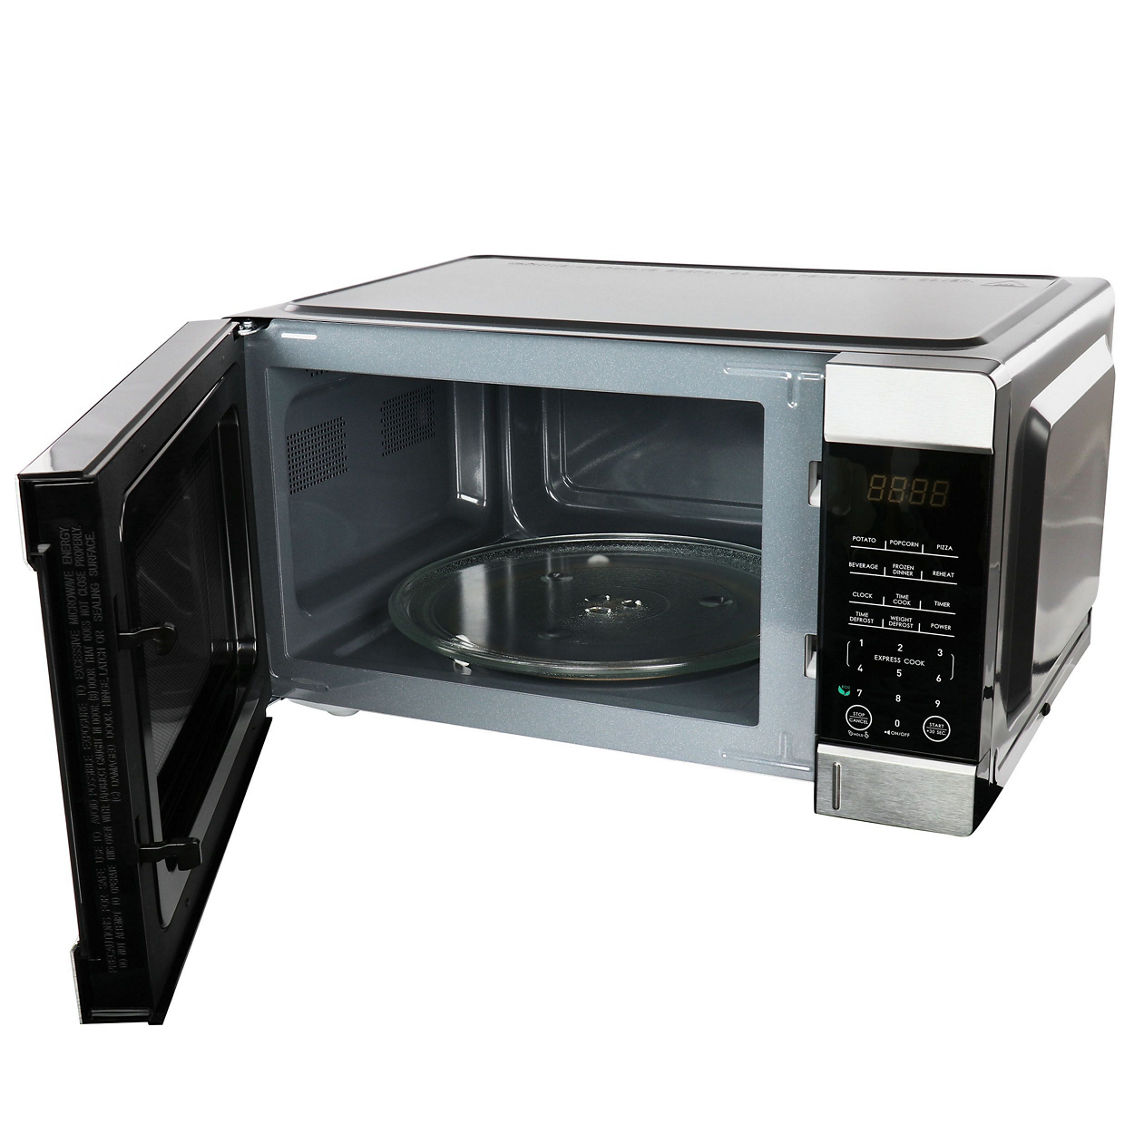 Galanz 1.1 cu ft 1000W Countertop Microwave Oven in Black with One Touch Express - Image 2 of 5